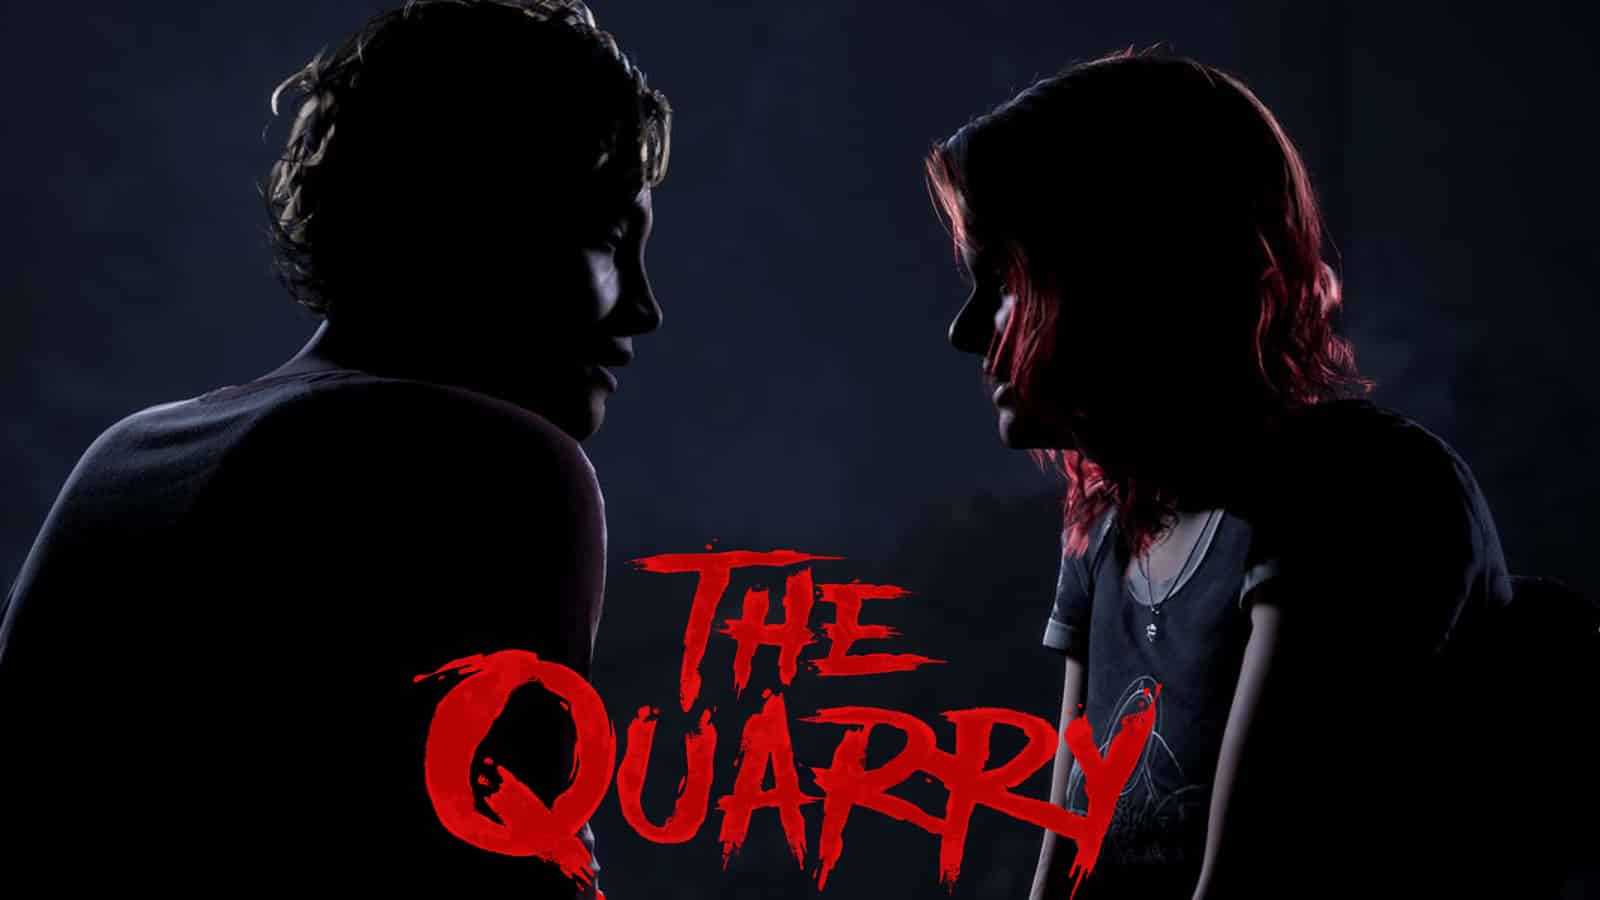 The Quarry characters cast